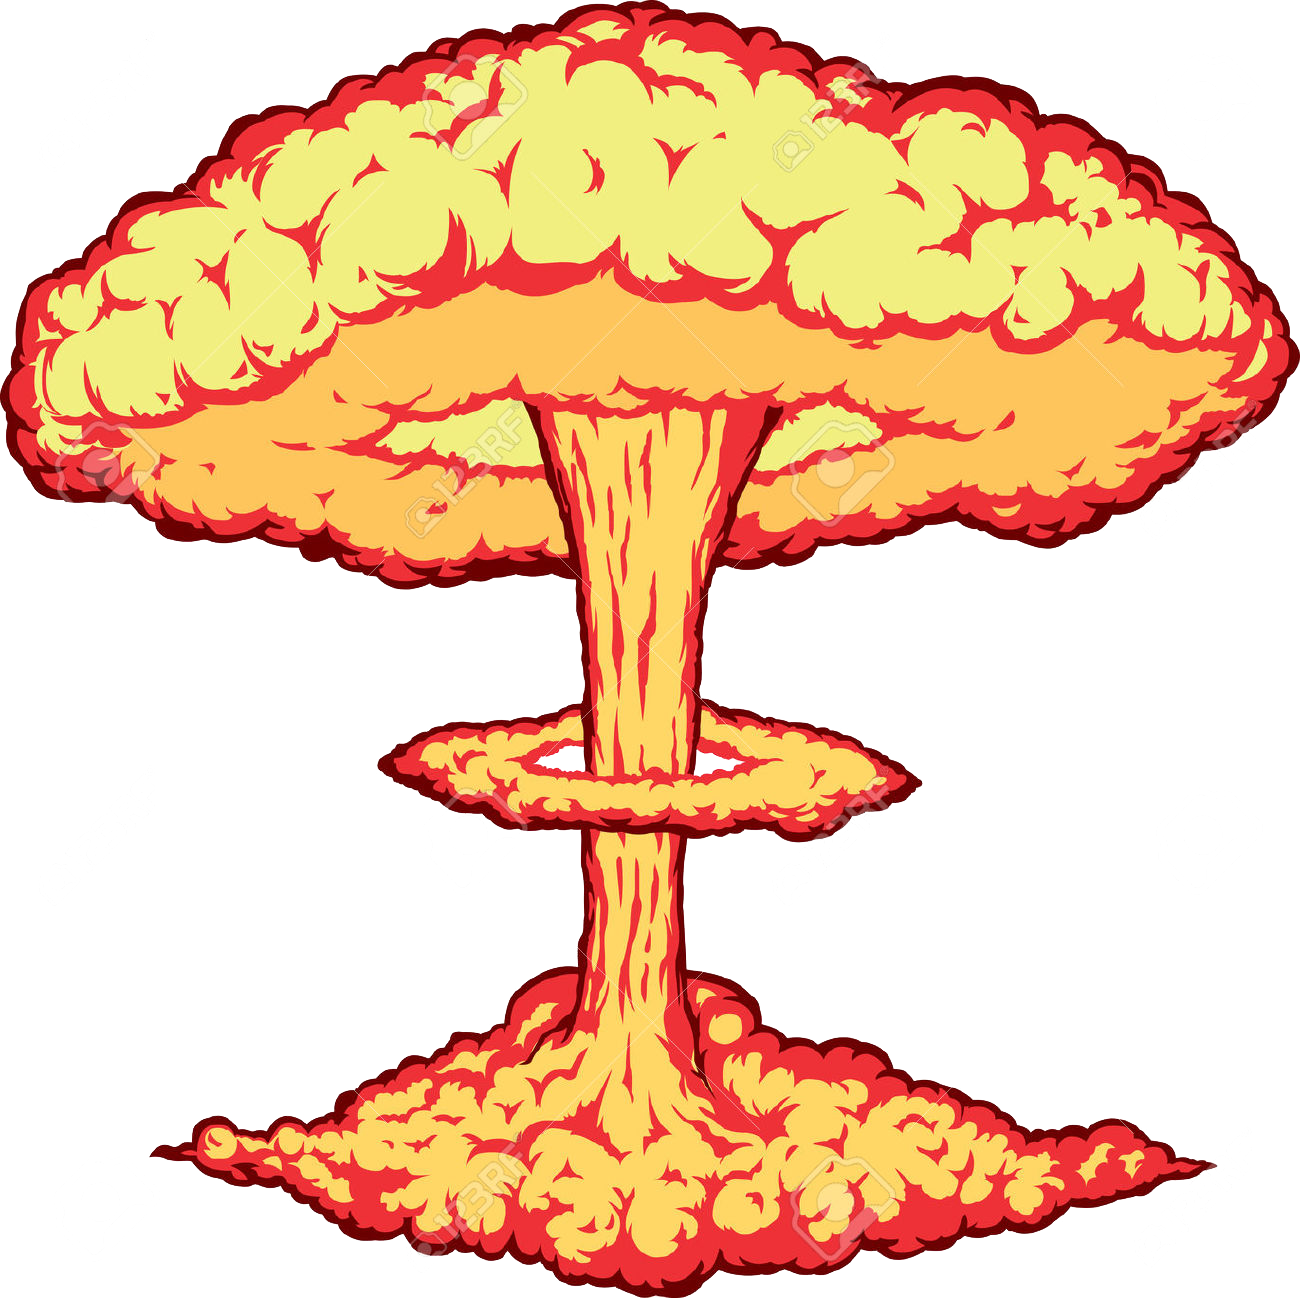 Download PNG image - Atomic Explosion PNG Photos 